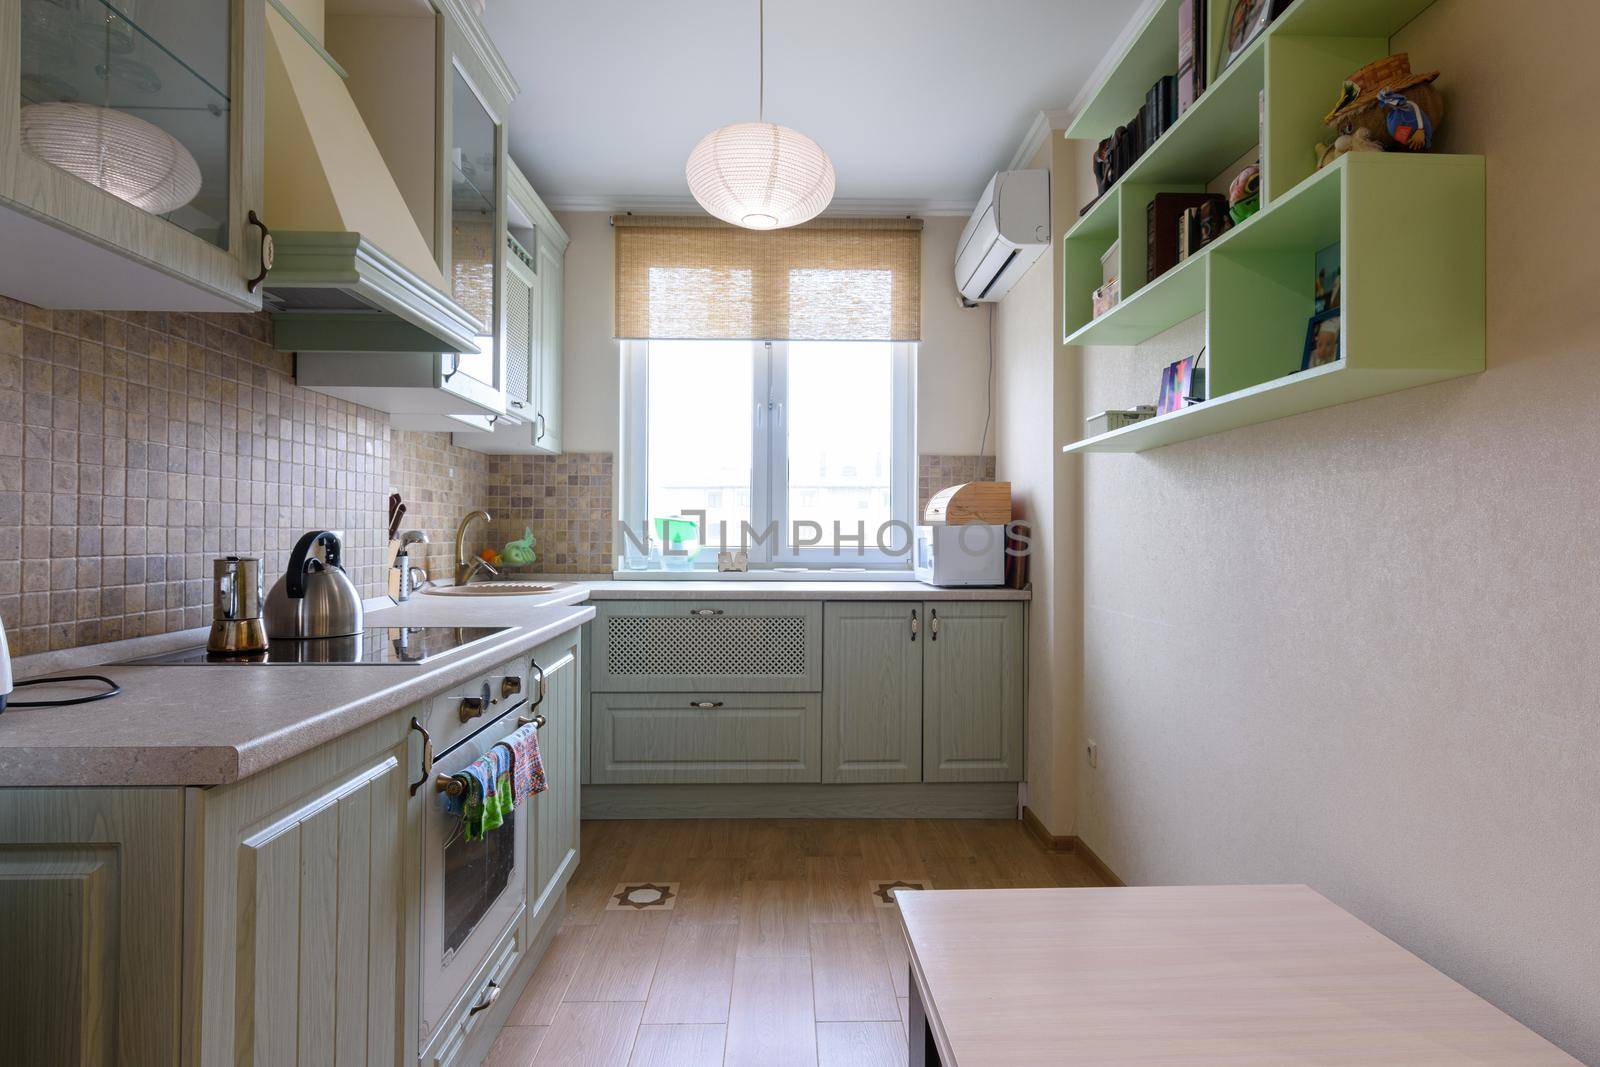 The interior of a light ordinary kitchen with a spacious kitchen set